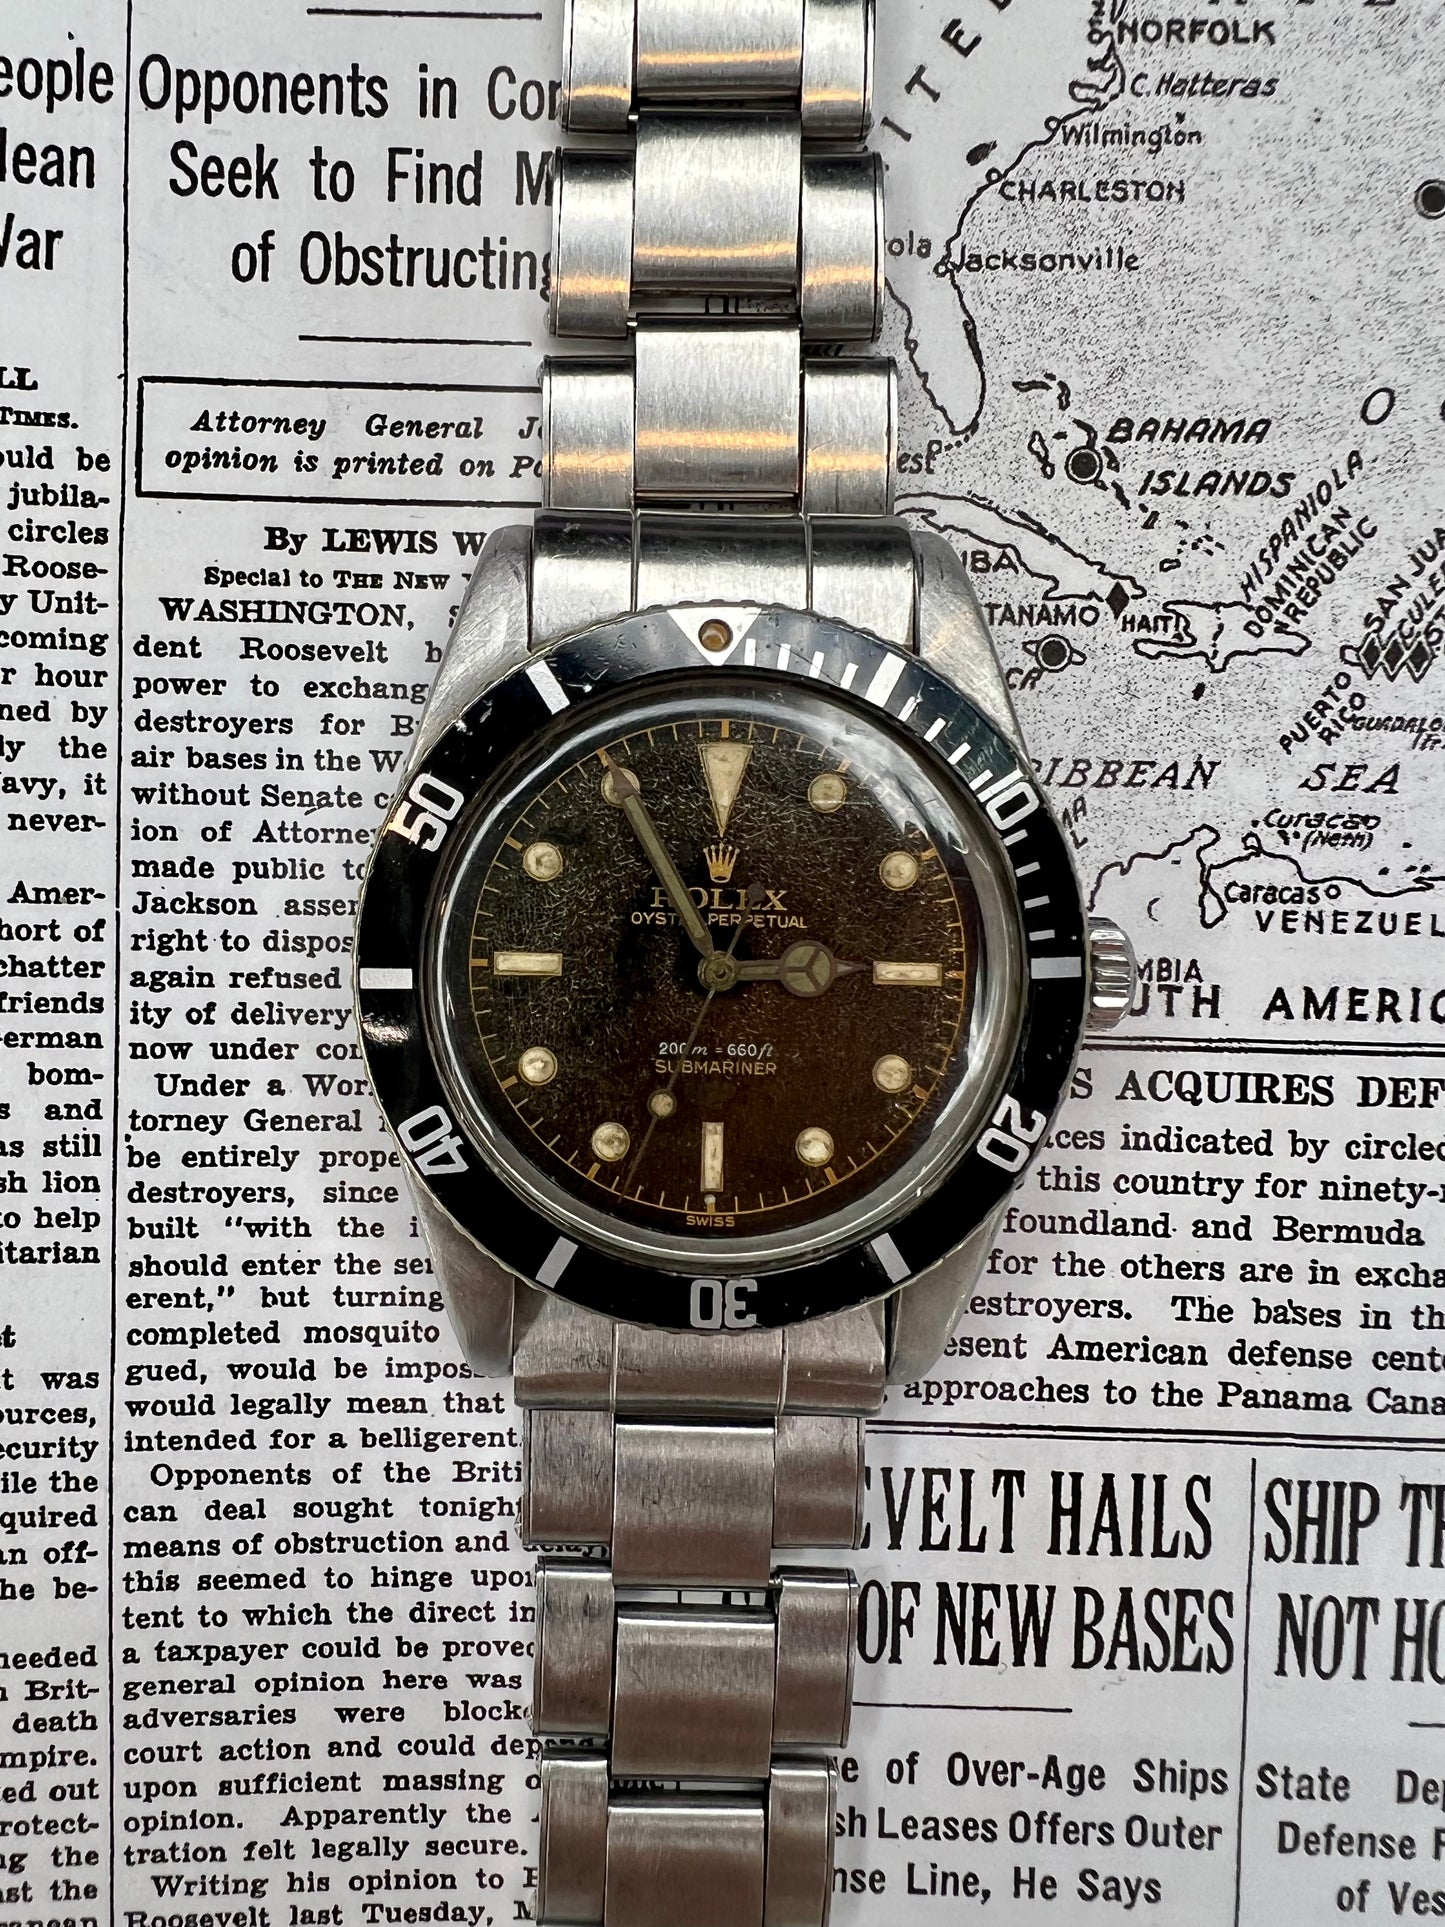 Rolex Submariner Reference 6536 1974 Manufacture